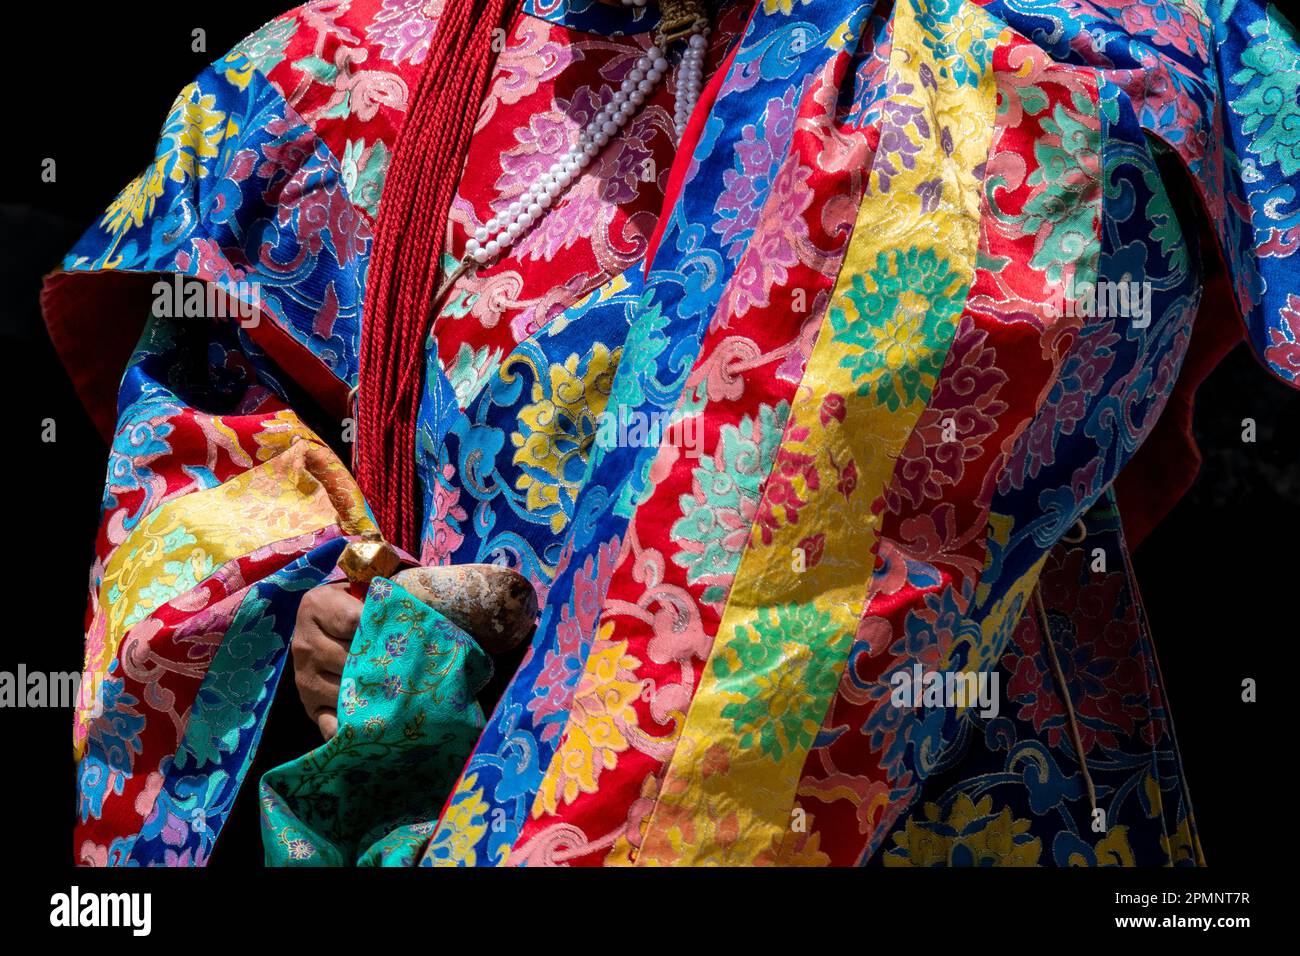 Details of Monks Robes during the Phyang Monastery Festival in Ladakh, India Stock Photo